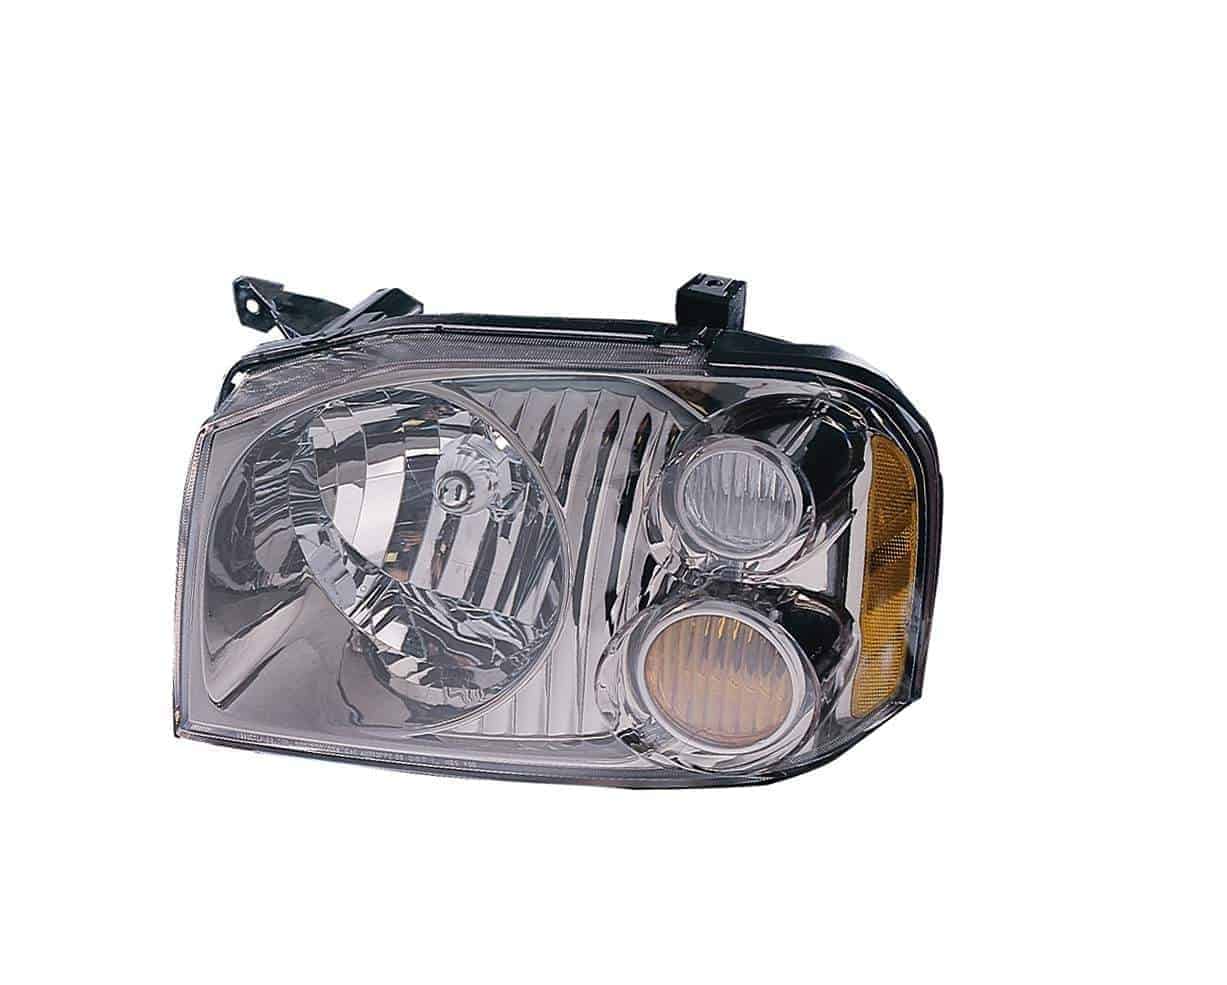 NI2502131C Front Light Headlight Assembly Composite